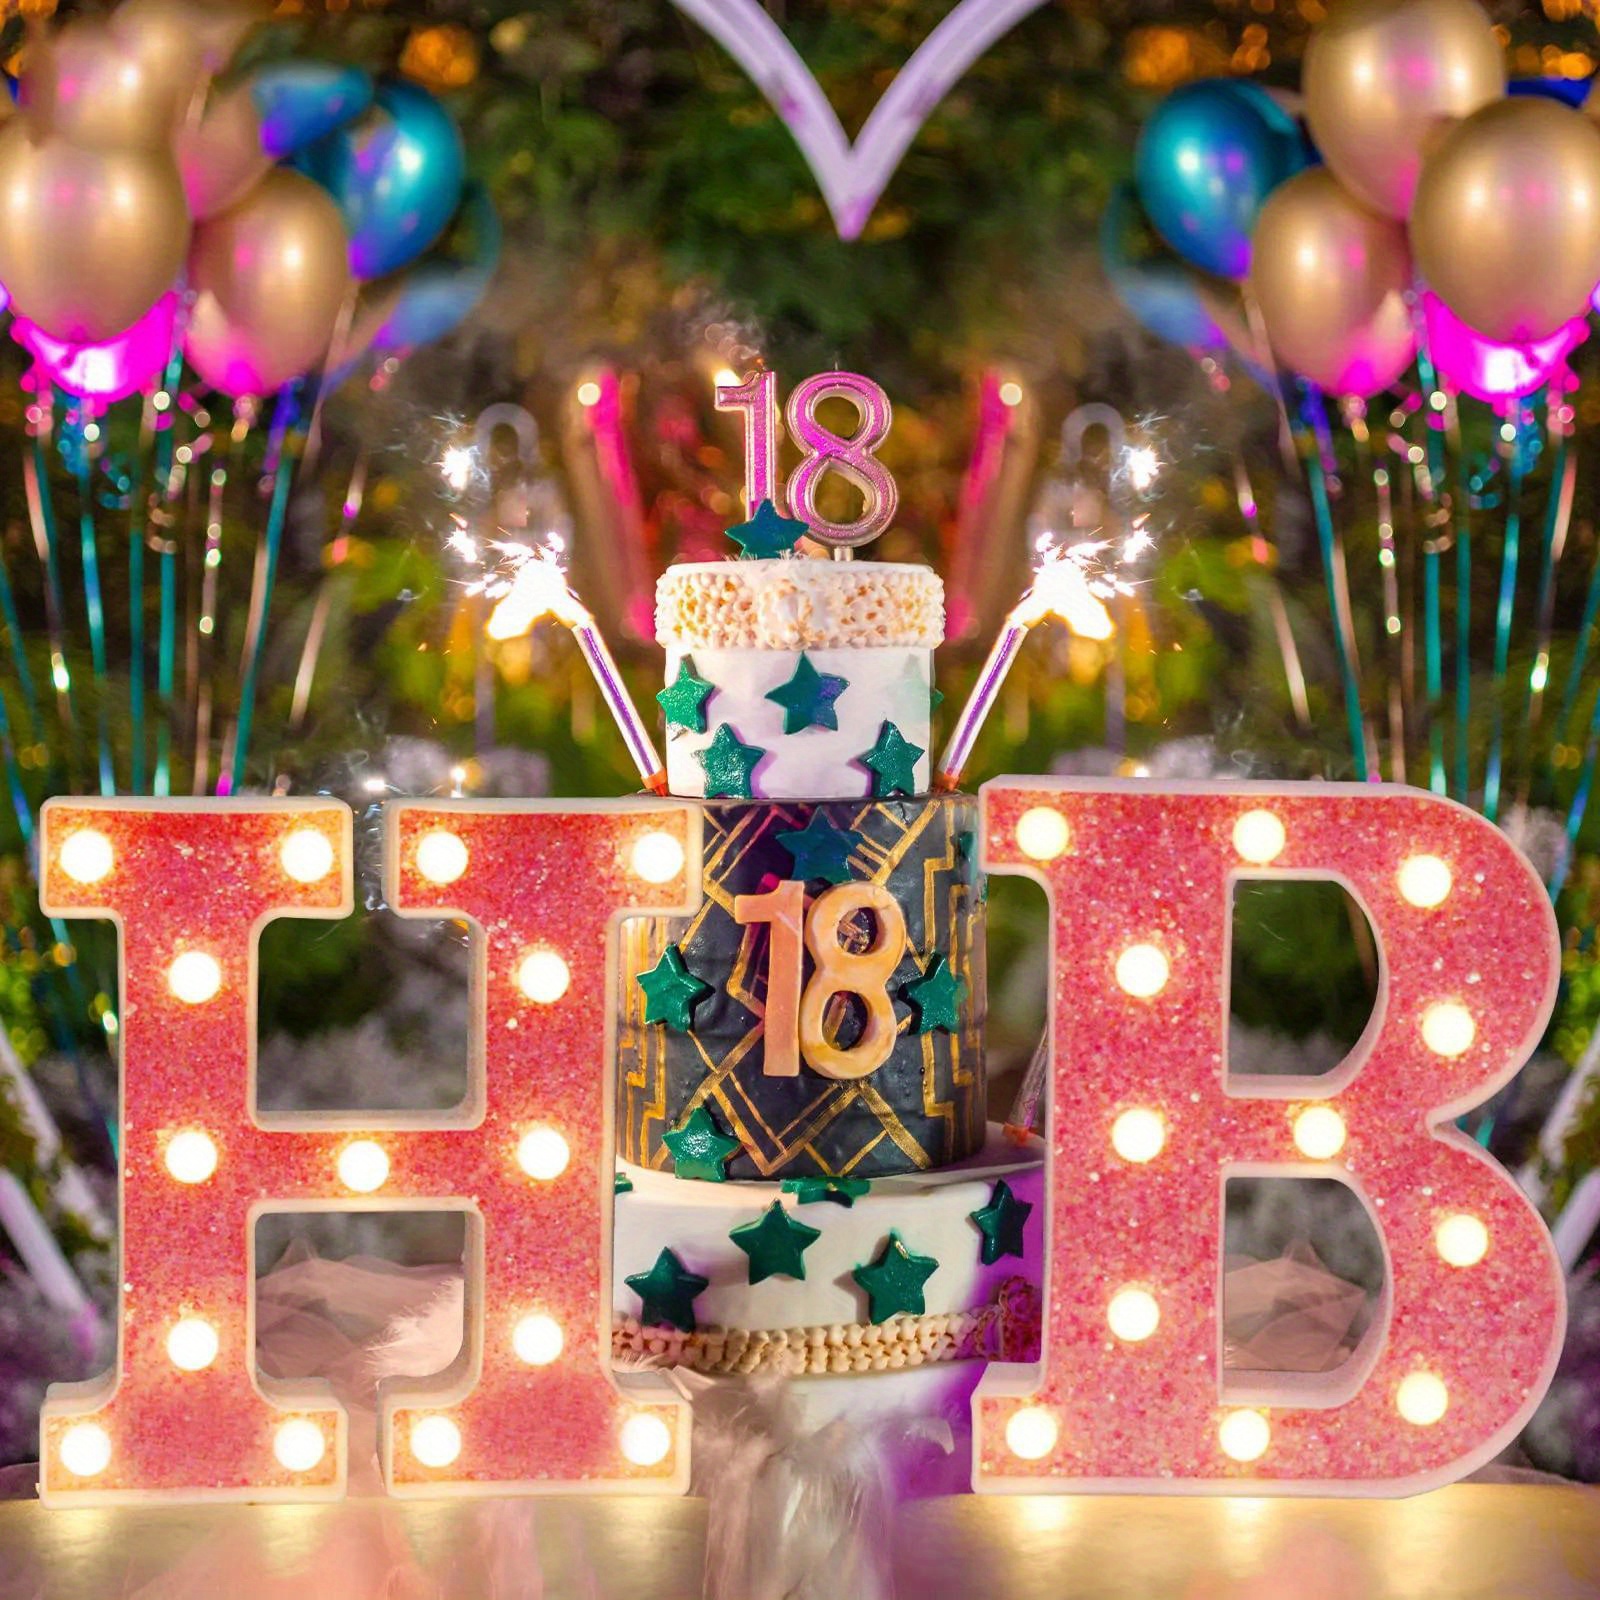 1pc Lighting Glowing Letters Light, LED Battery Powered Letter Light, For Bedroom Birthday Party Wedding Home Christmas Decoration details 0